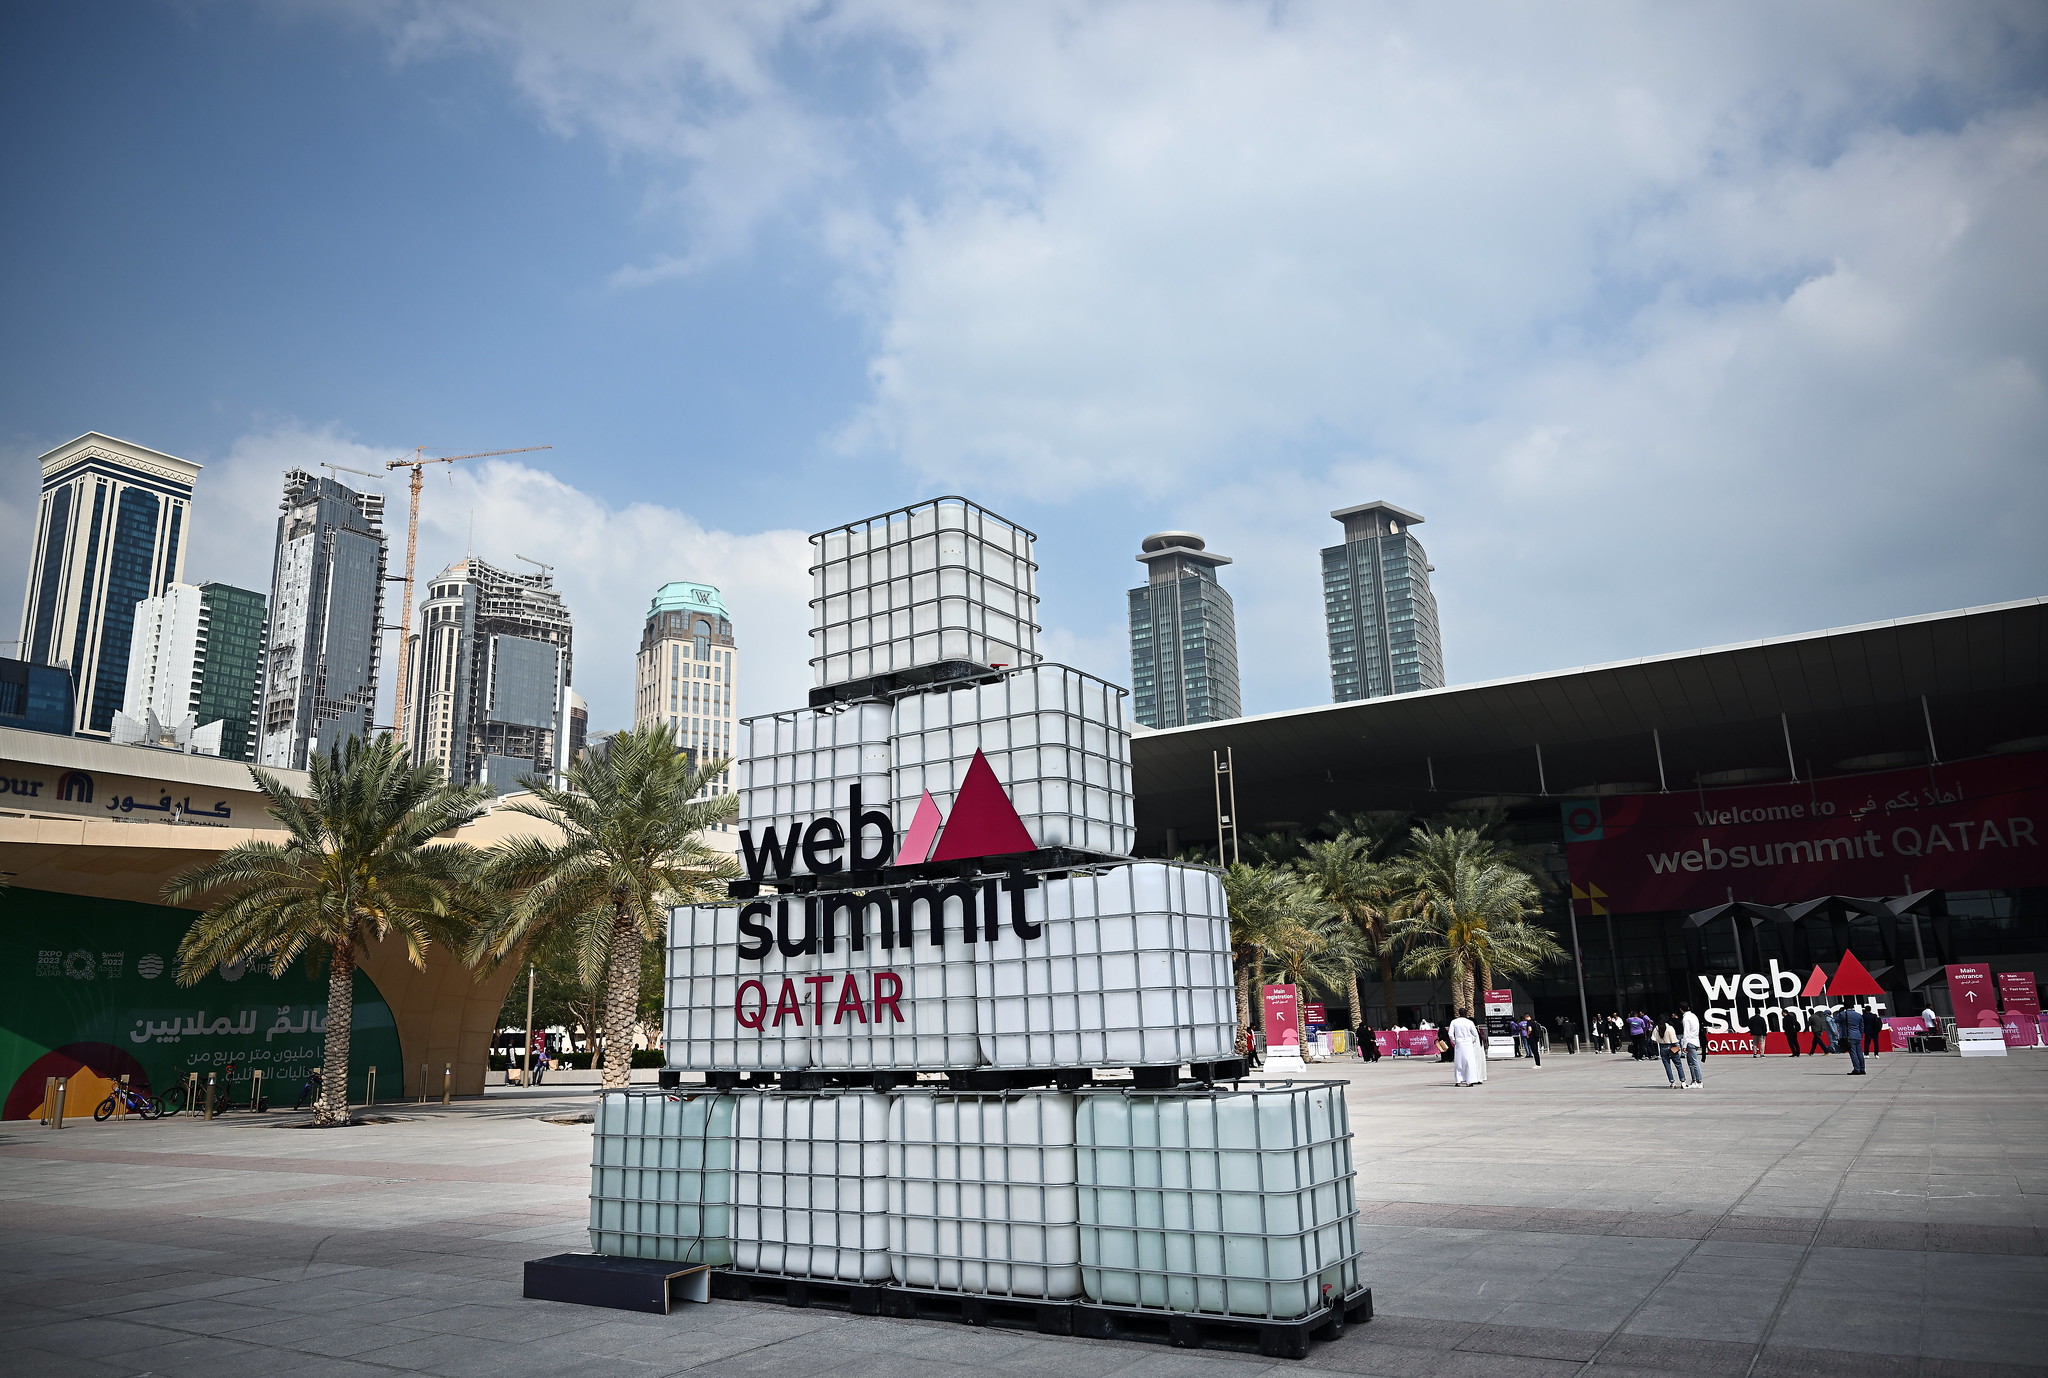 A general view of Web Summit Qatar branding and wayfinding ahead of the opening of Web Summit Qatar 2024 at the Doha Exhibition and Convention Center in Doha, Qatar